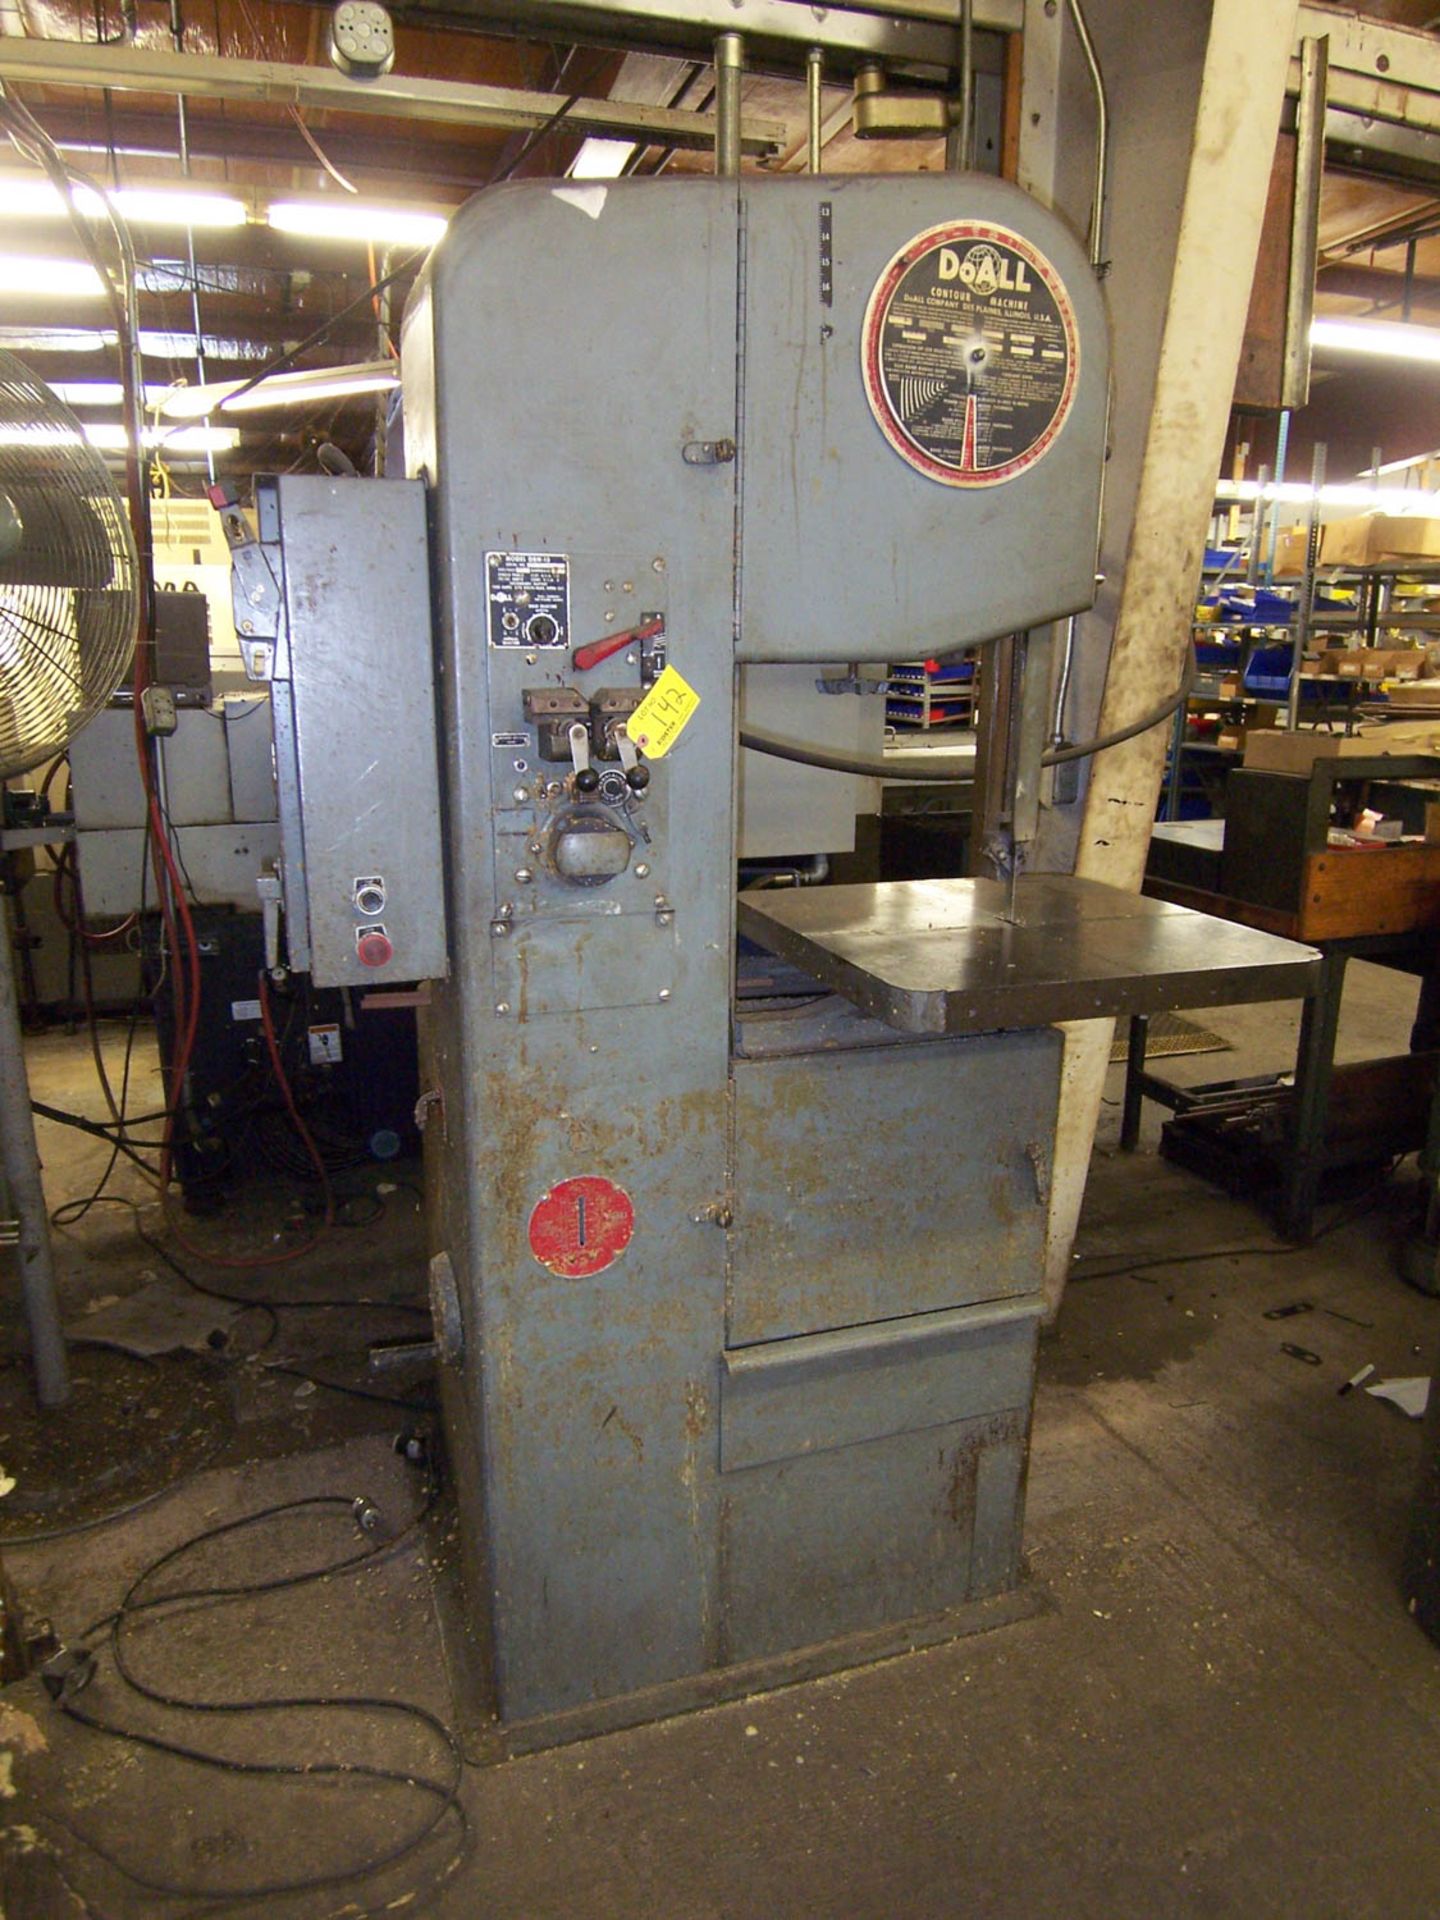 16" DoALL MDL. 1612 VERTICAL BANDSAW, WITH BUTT WELDING ATTACHMENT, 5200 FPM, S/N: 237-72343 - Image 2 of 2